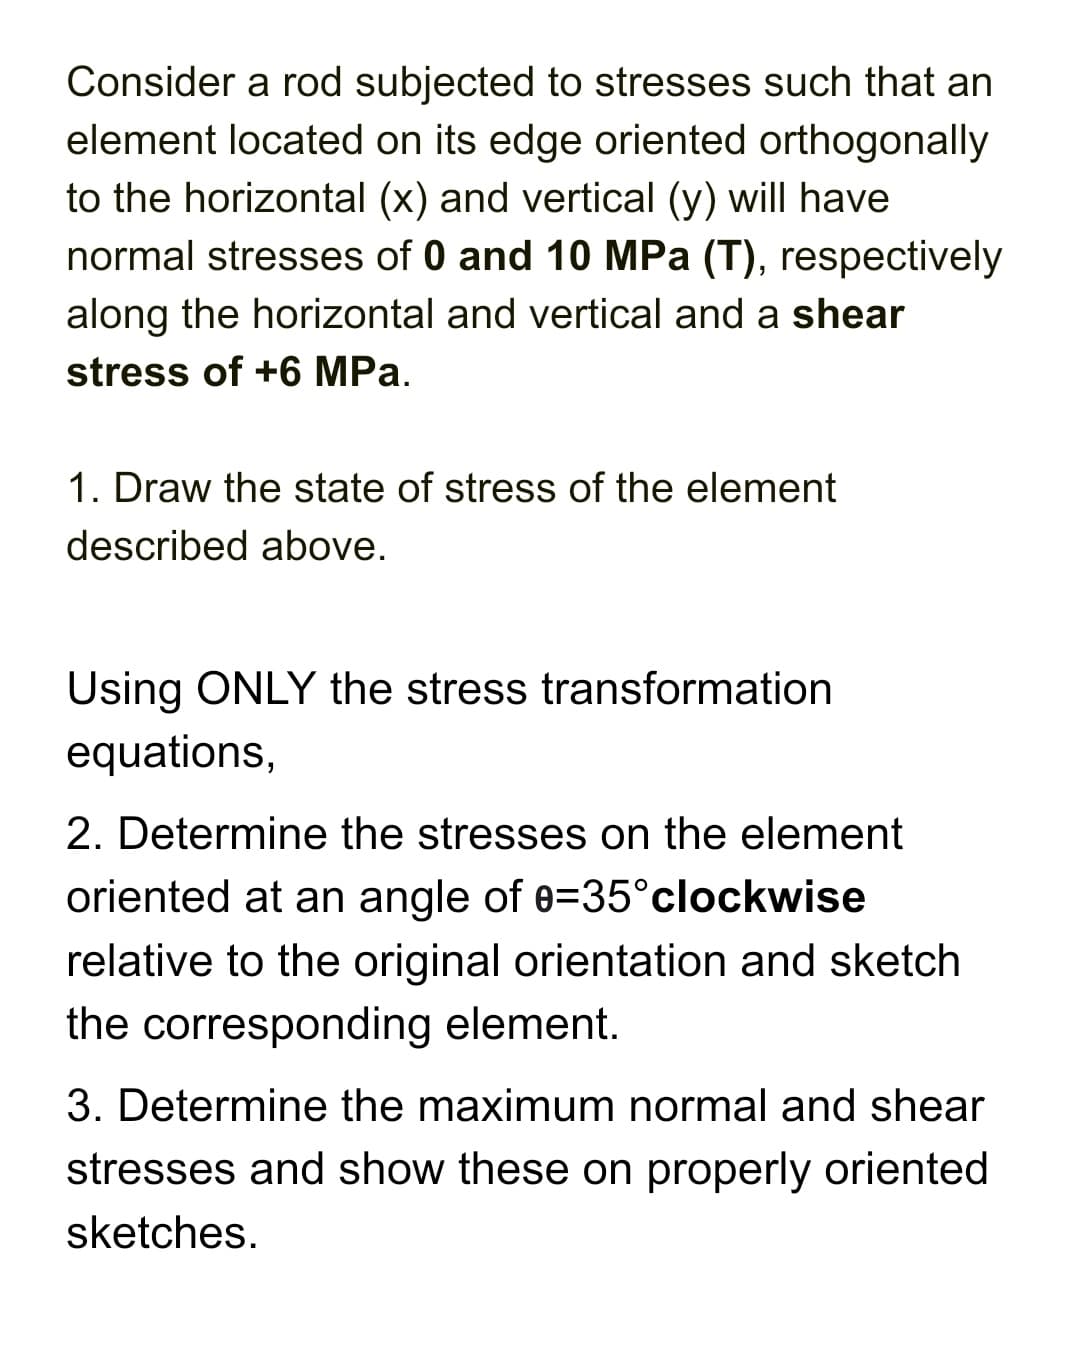 Consider a rod subjected to stresses such that an
element located on its edge oriented orthogonally
to the horizontal (x) and vertical (y) will have
normal stresses of 0 and 10 MPa (T), respectively
along the horizontal and vertical and a shear
stress of +6 MPa.
1. Draw the state of stress of the element
described above.
Using ONLY the stress transformation
equations,
2. Determine the stresses on the element
oriented at an angle of 0=35°clockwise
relative to the original orientation and sketch
the corresponding element.
3. Determine the maximum normal and shear
stresses and show these on properly oriented
sketches.